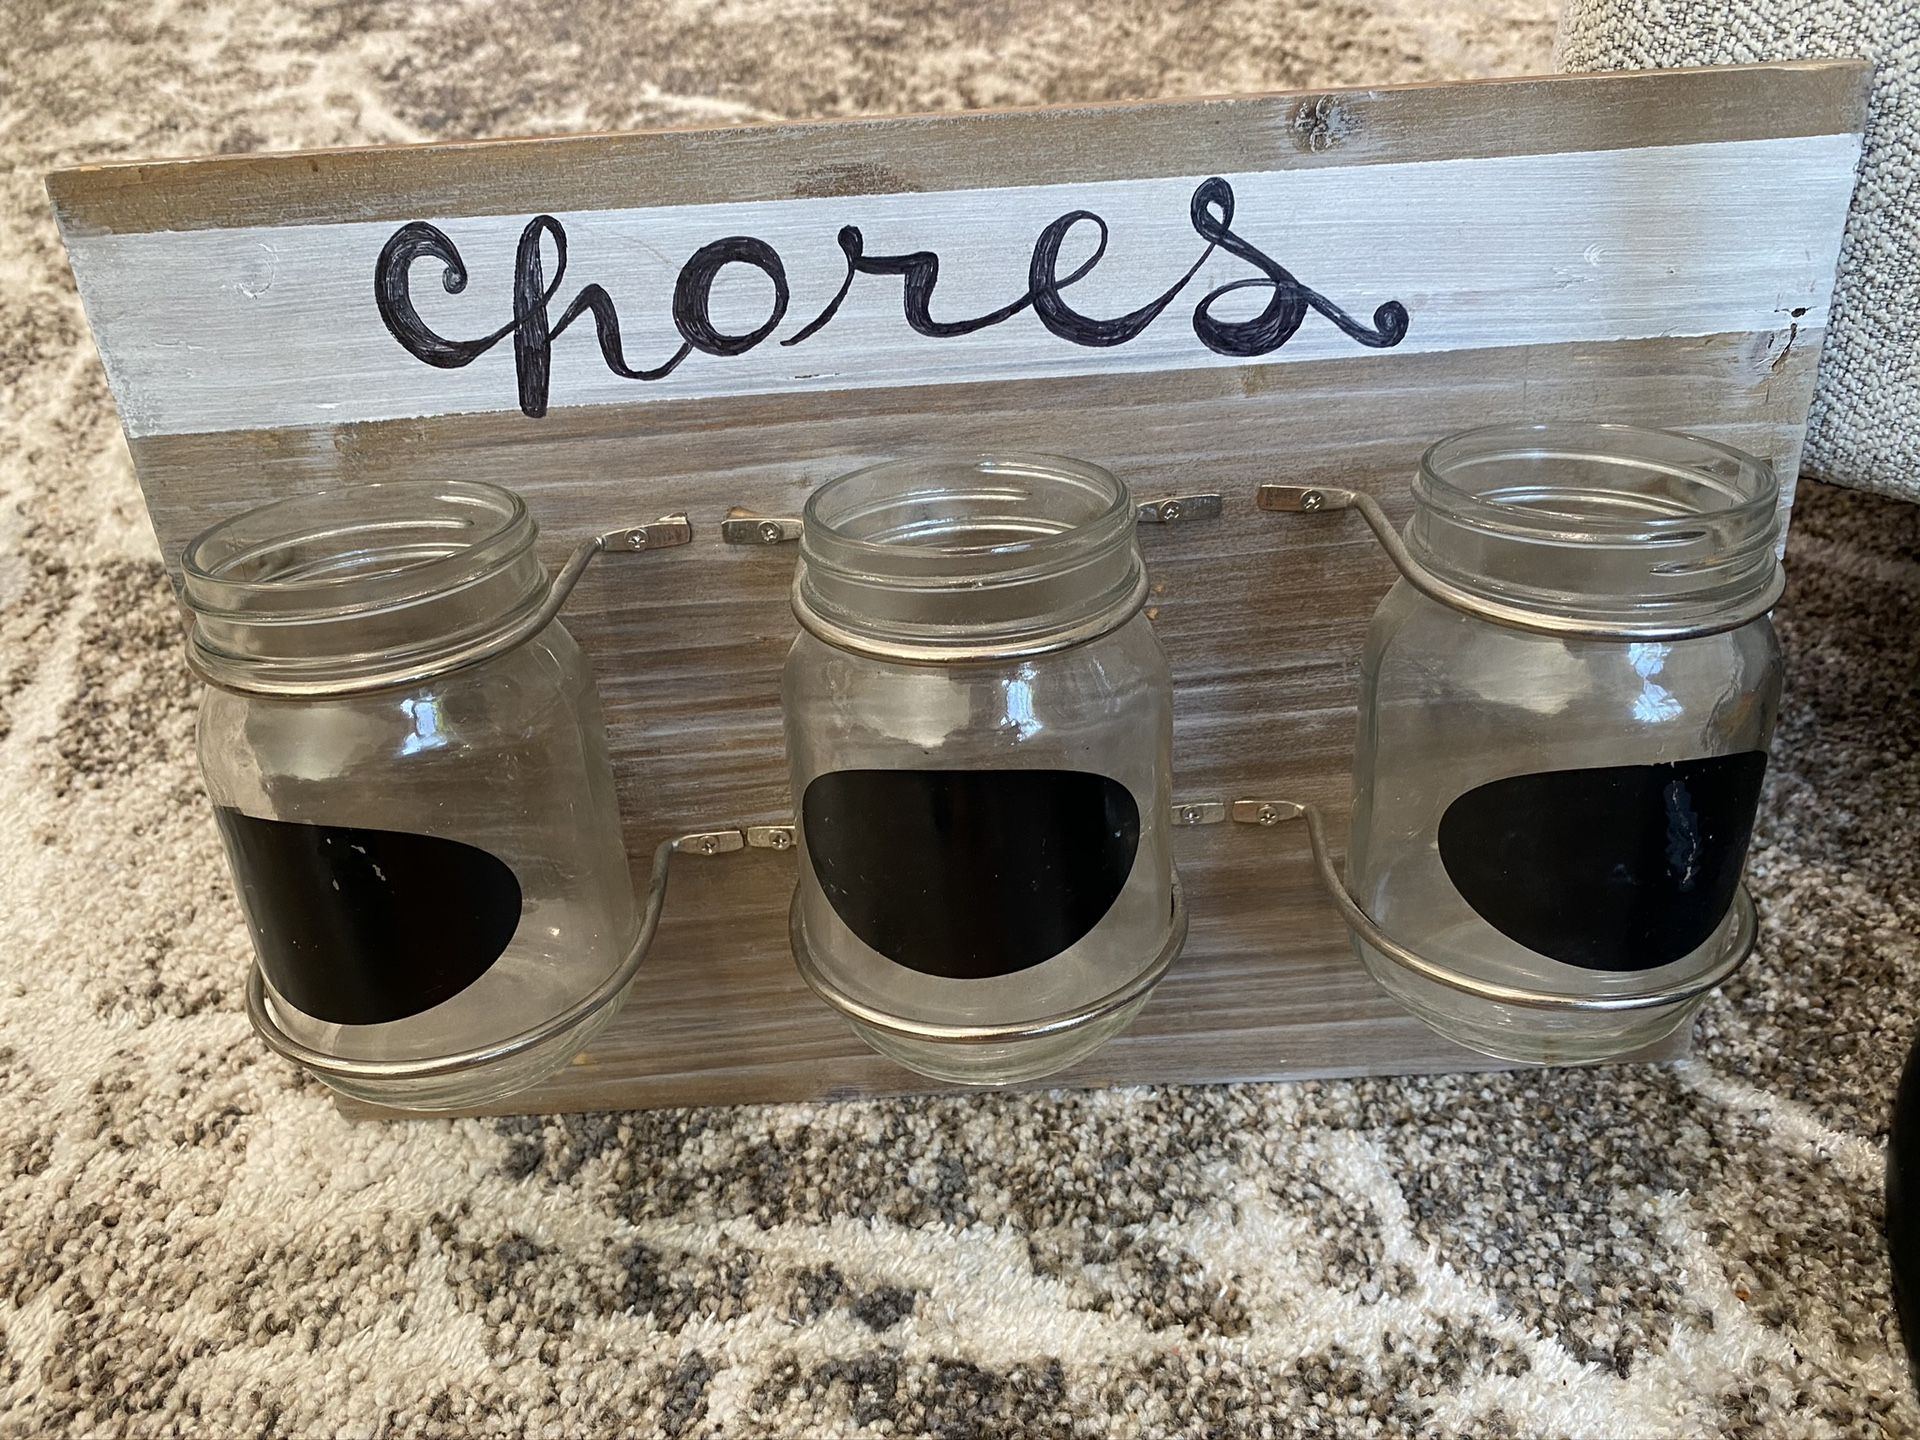 3 chore jars attached 2 wood Measures 10x15”. Great fun for the family. Can use chalk for names